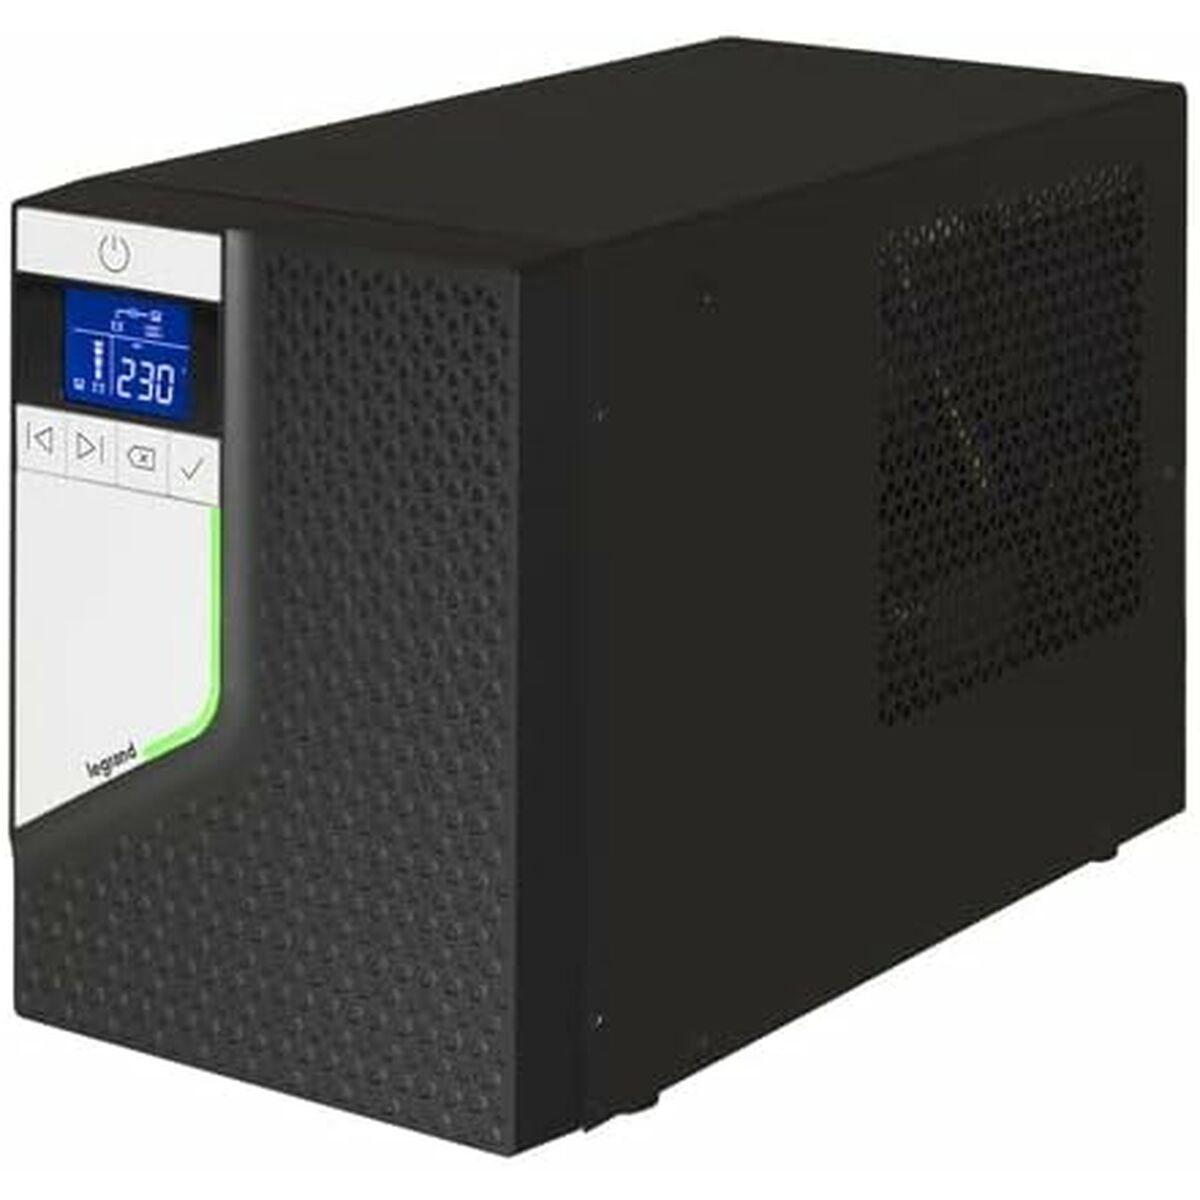 Uninterruptible Power Supply System Interactive UPS Legrand LG-311063 1600 W 2000 VA, Legrand, Computing, Accessories, uninterruptible-power-supply-system-interactive-ups-legrand-lg-311063-1600-w-2000-va, Brand_Legrand, category-reference-2609, category-reference-2642, category-reference-2845, category-reference-t-19685, category-reference-t-19908, category-reference-t-21341, computers / peripherals, Condition_NEW, office, Price_+ 1000, Teleworking, RiotNook